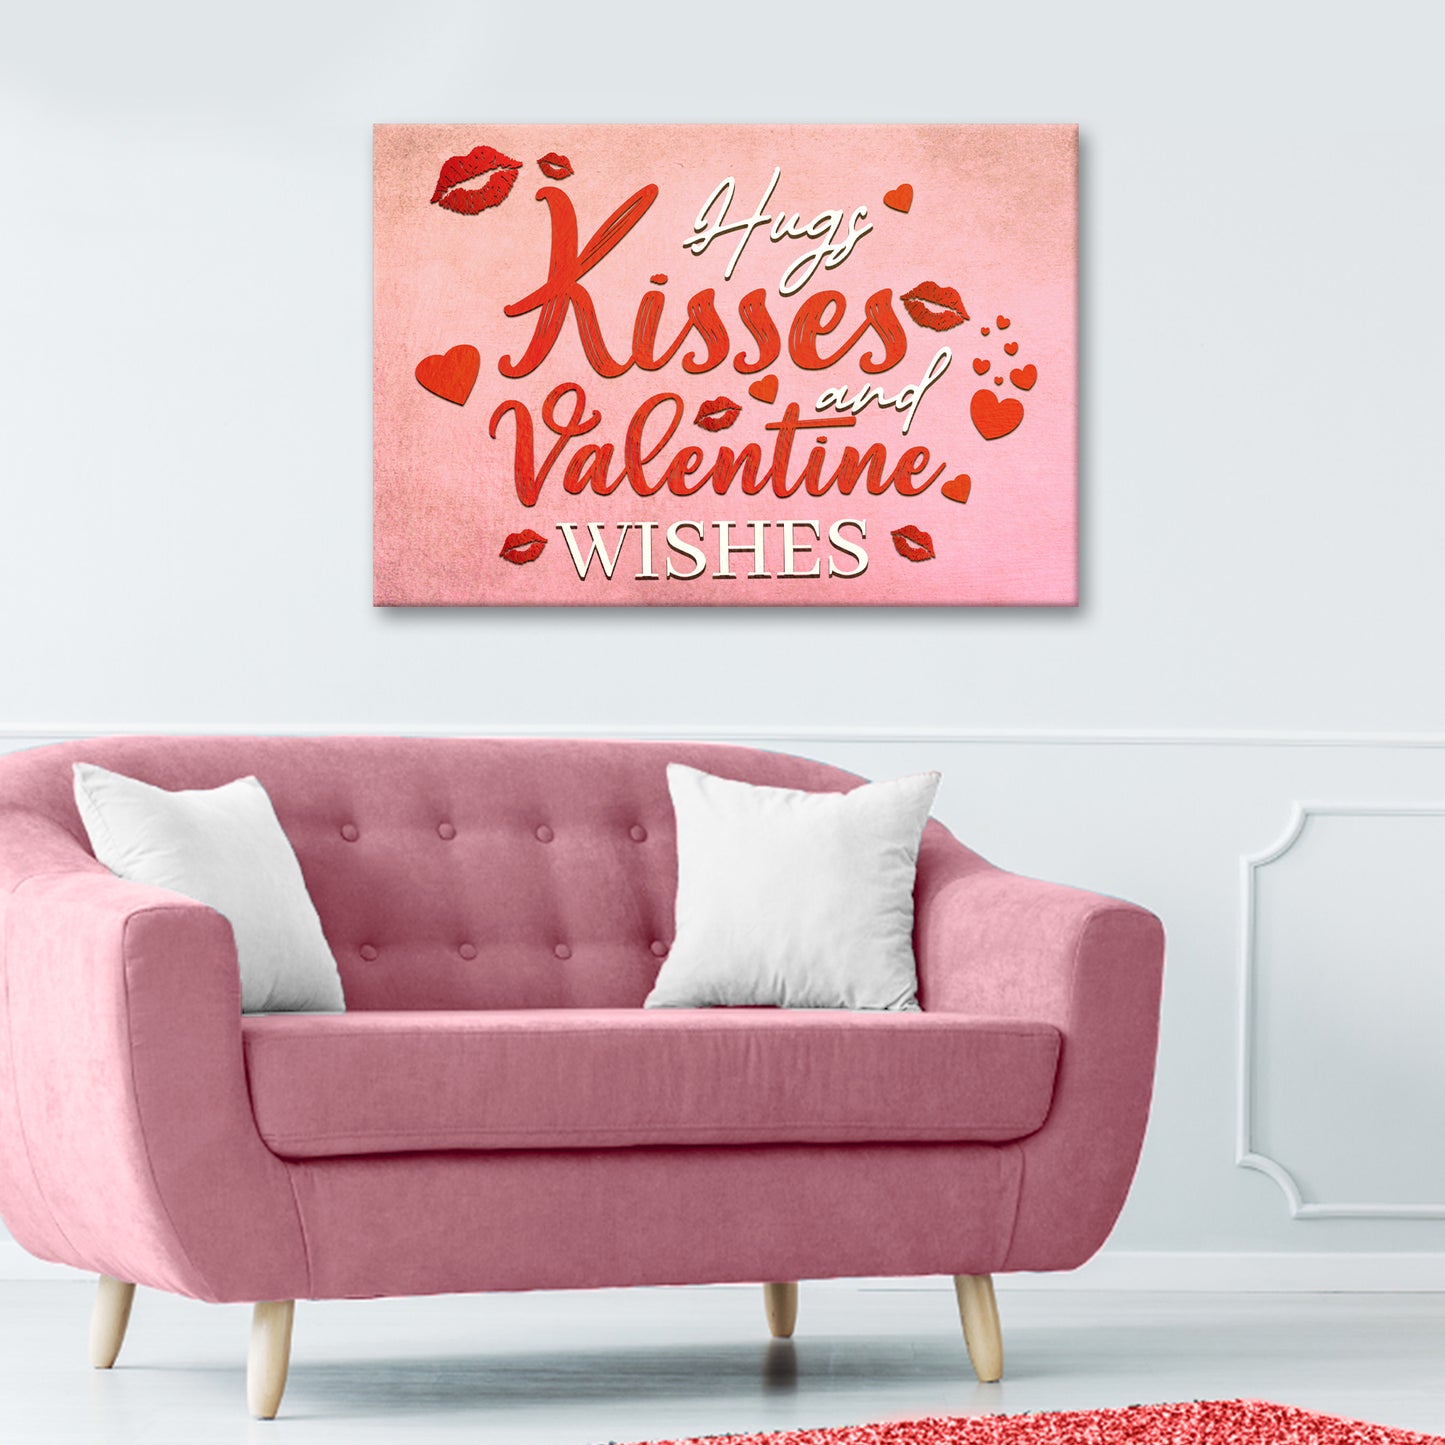 Hugs Kisses and Valentine Wishes Sign - Image by Tailored Canvases